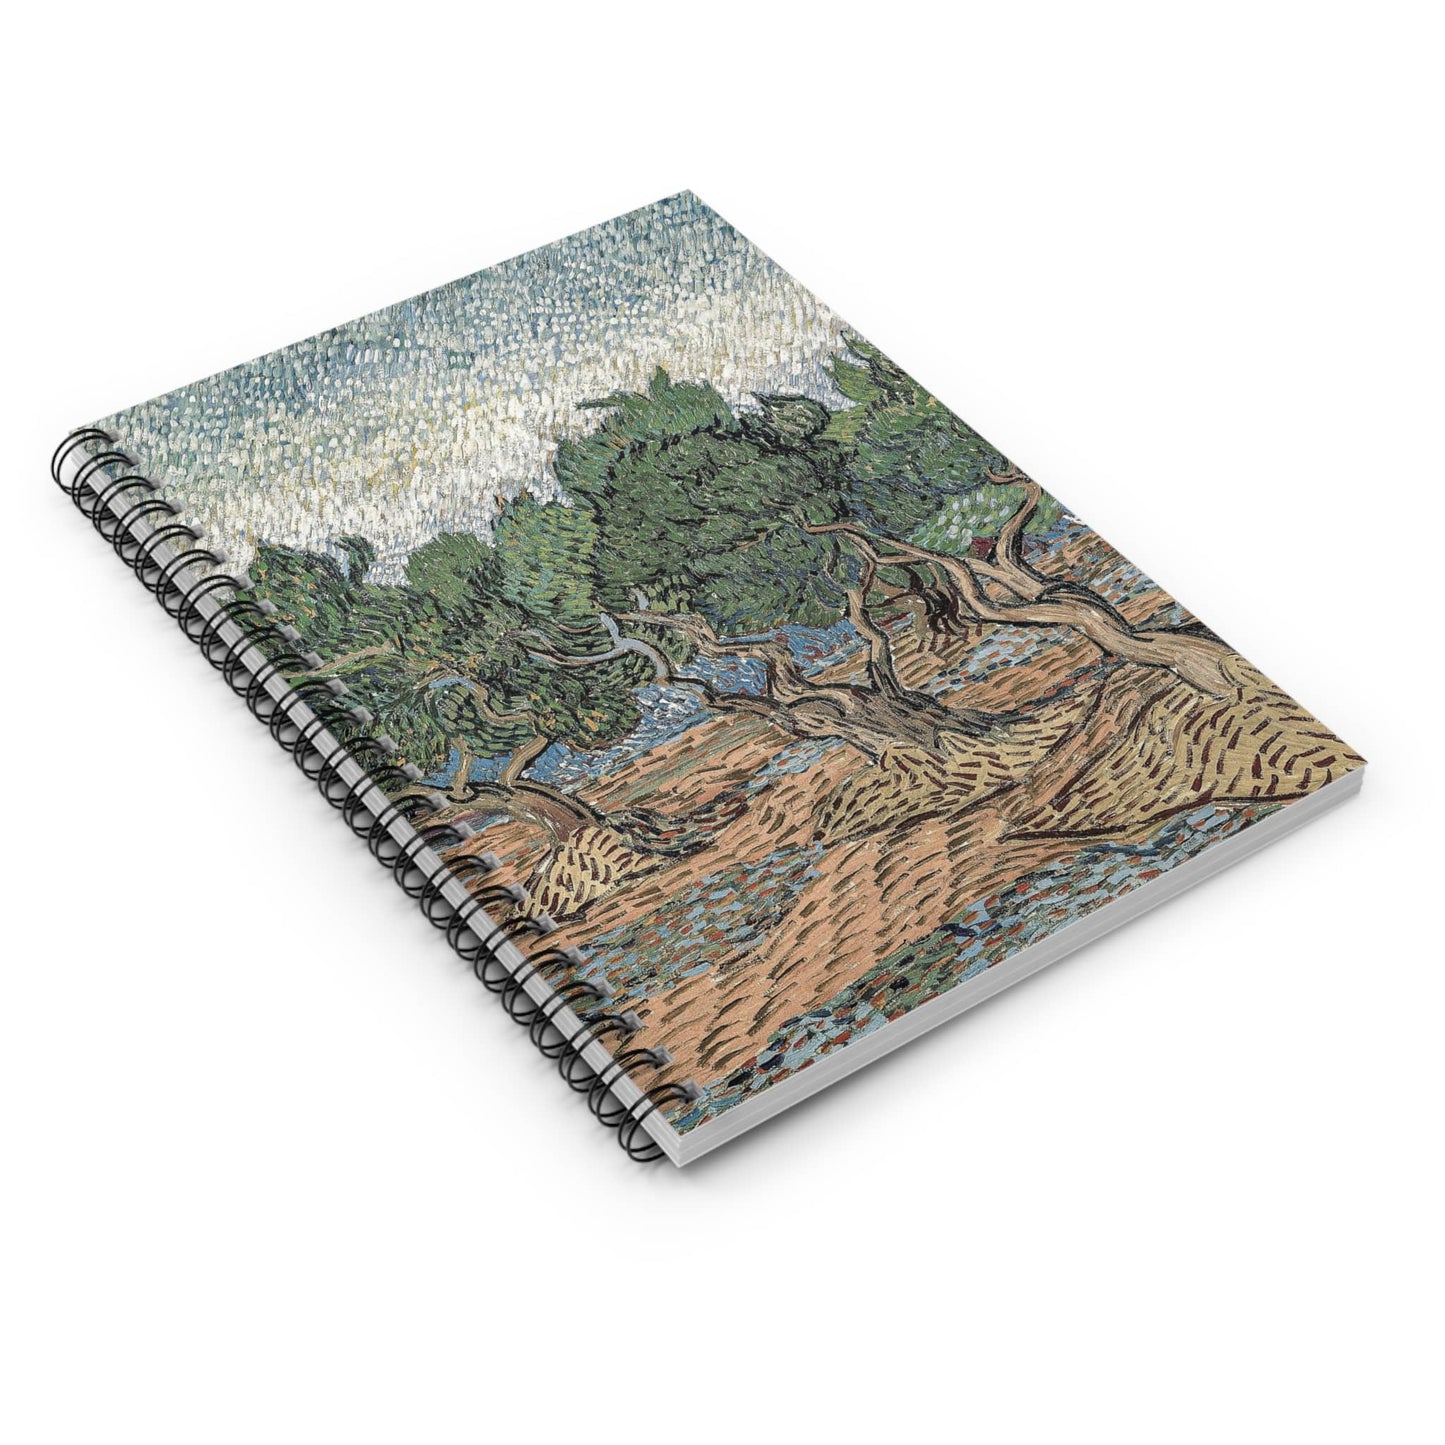 Relaxing Tree Spiral Notebook Laying Flat on White Surface